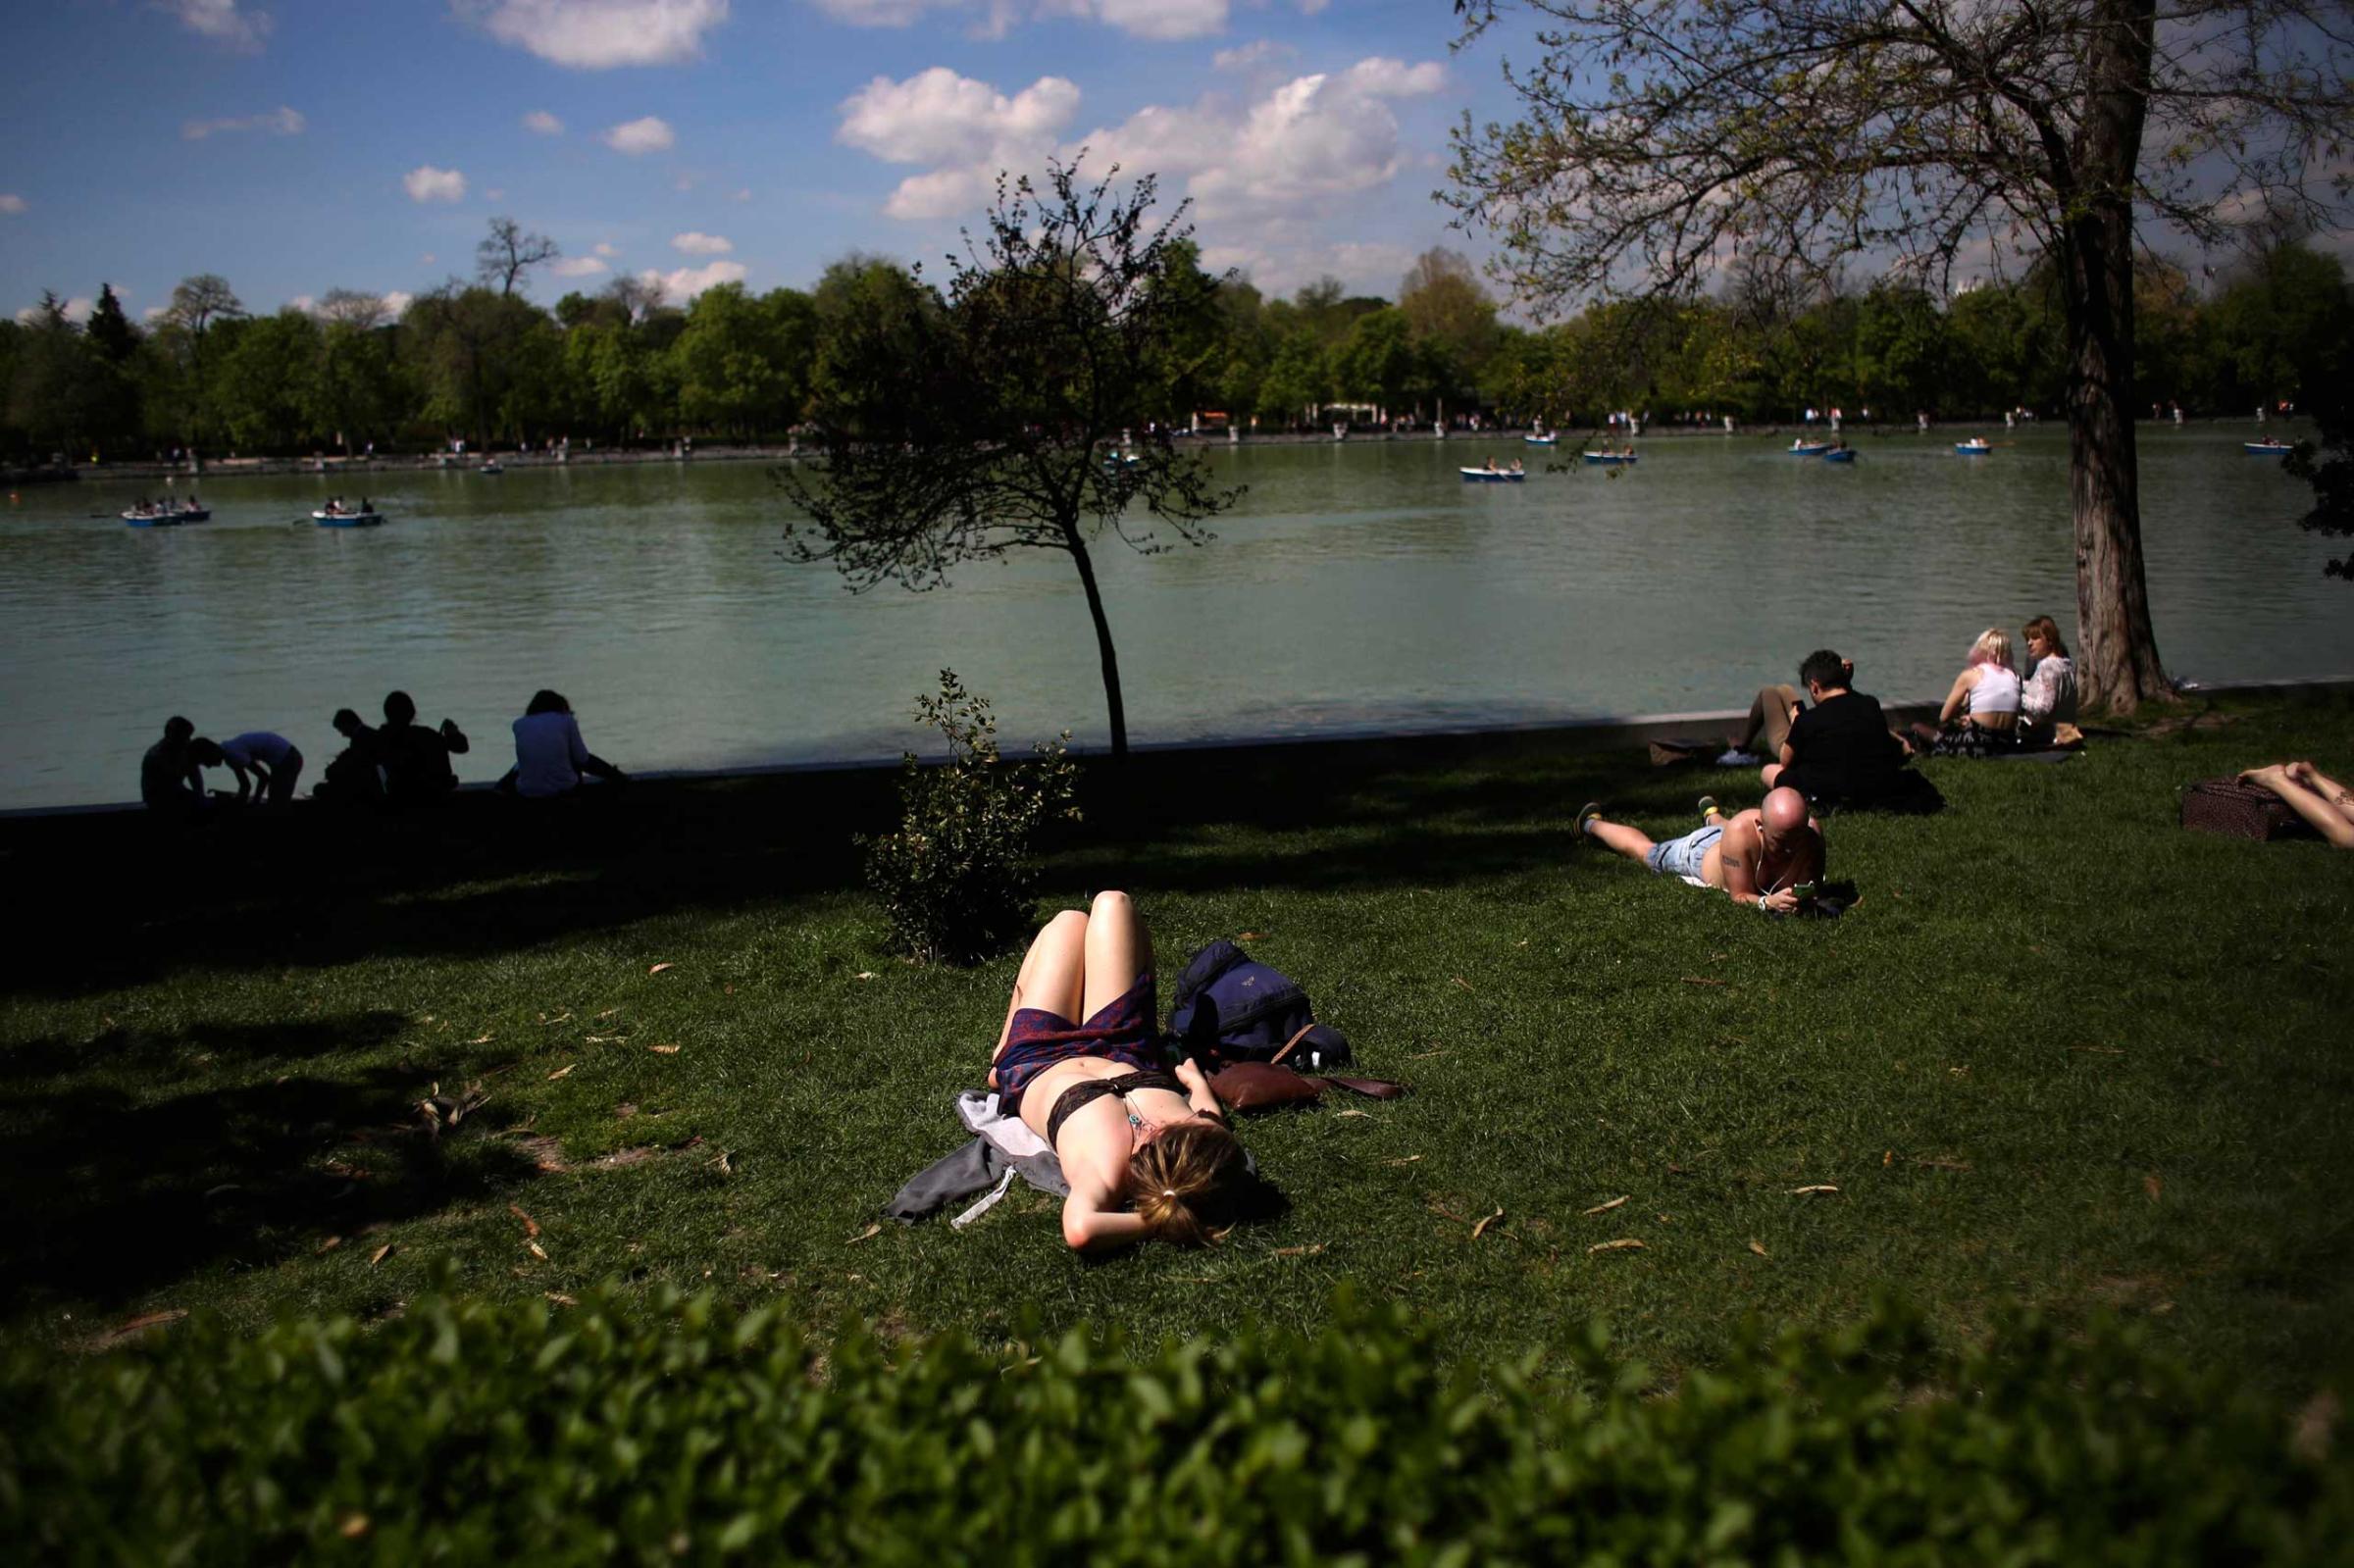 People sunbathe and watch boats on an artificial lake as they enjoy the warm weather during a sunny spring day at Madrid's Retiro park